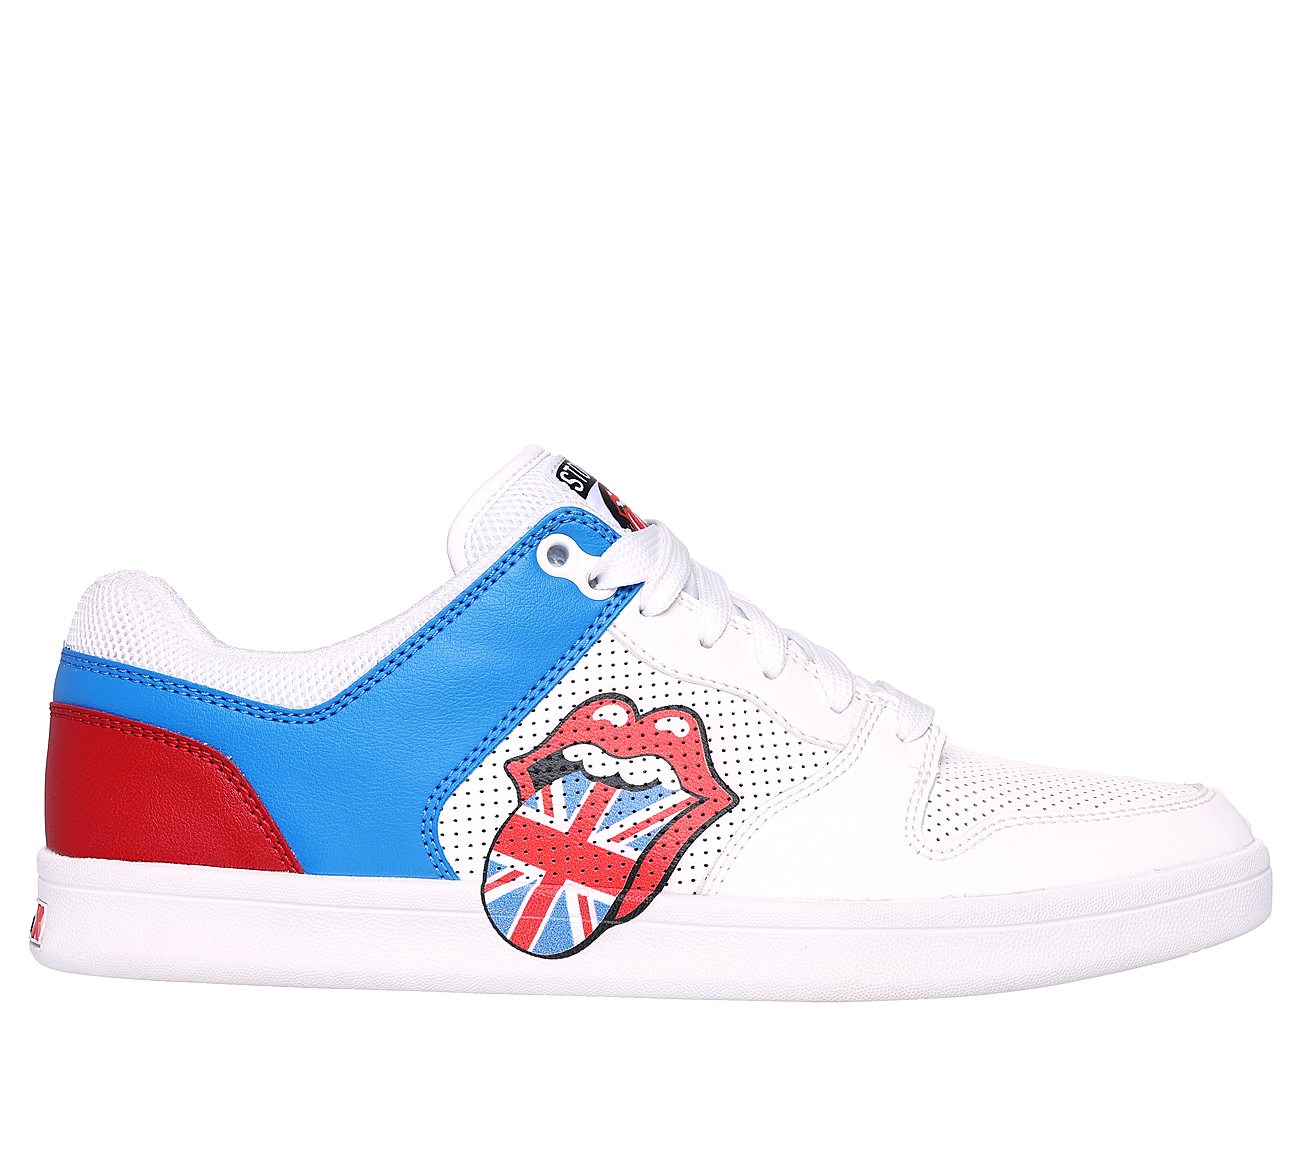 Rolling Stones: Classic Cup - Euro Lick, WHITE/BLUE/RED Footwear Lateral View